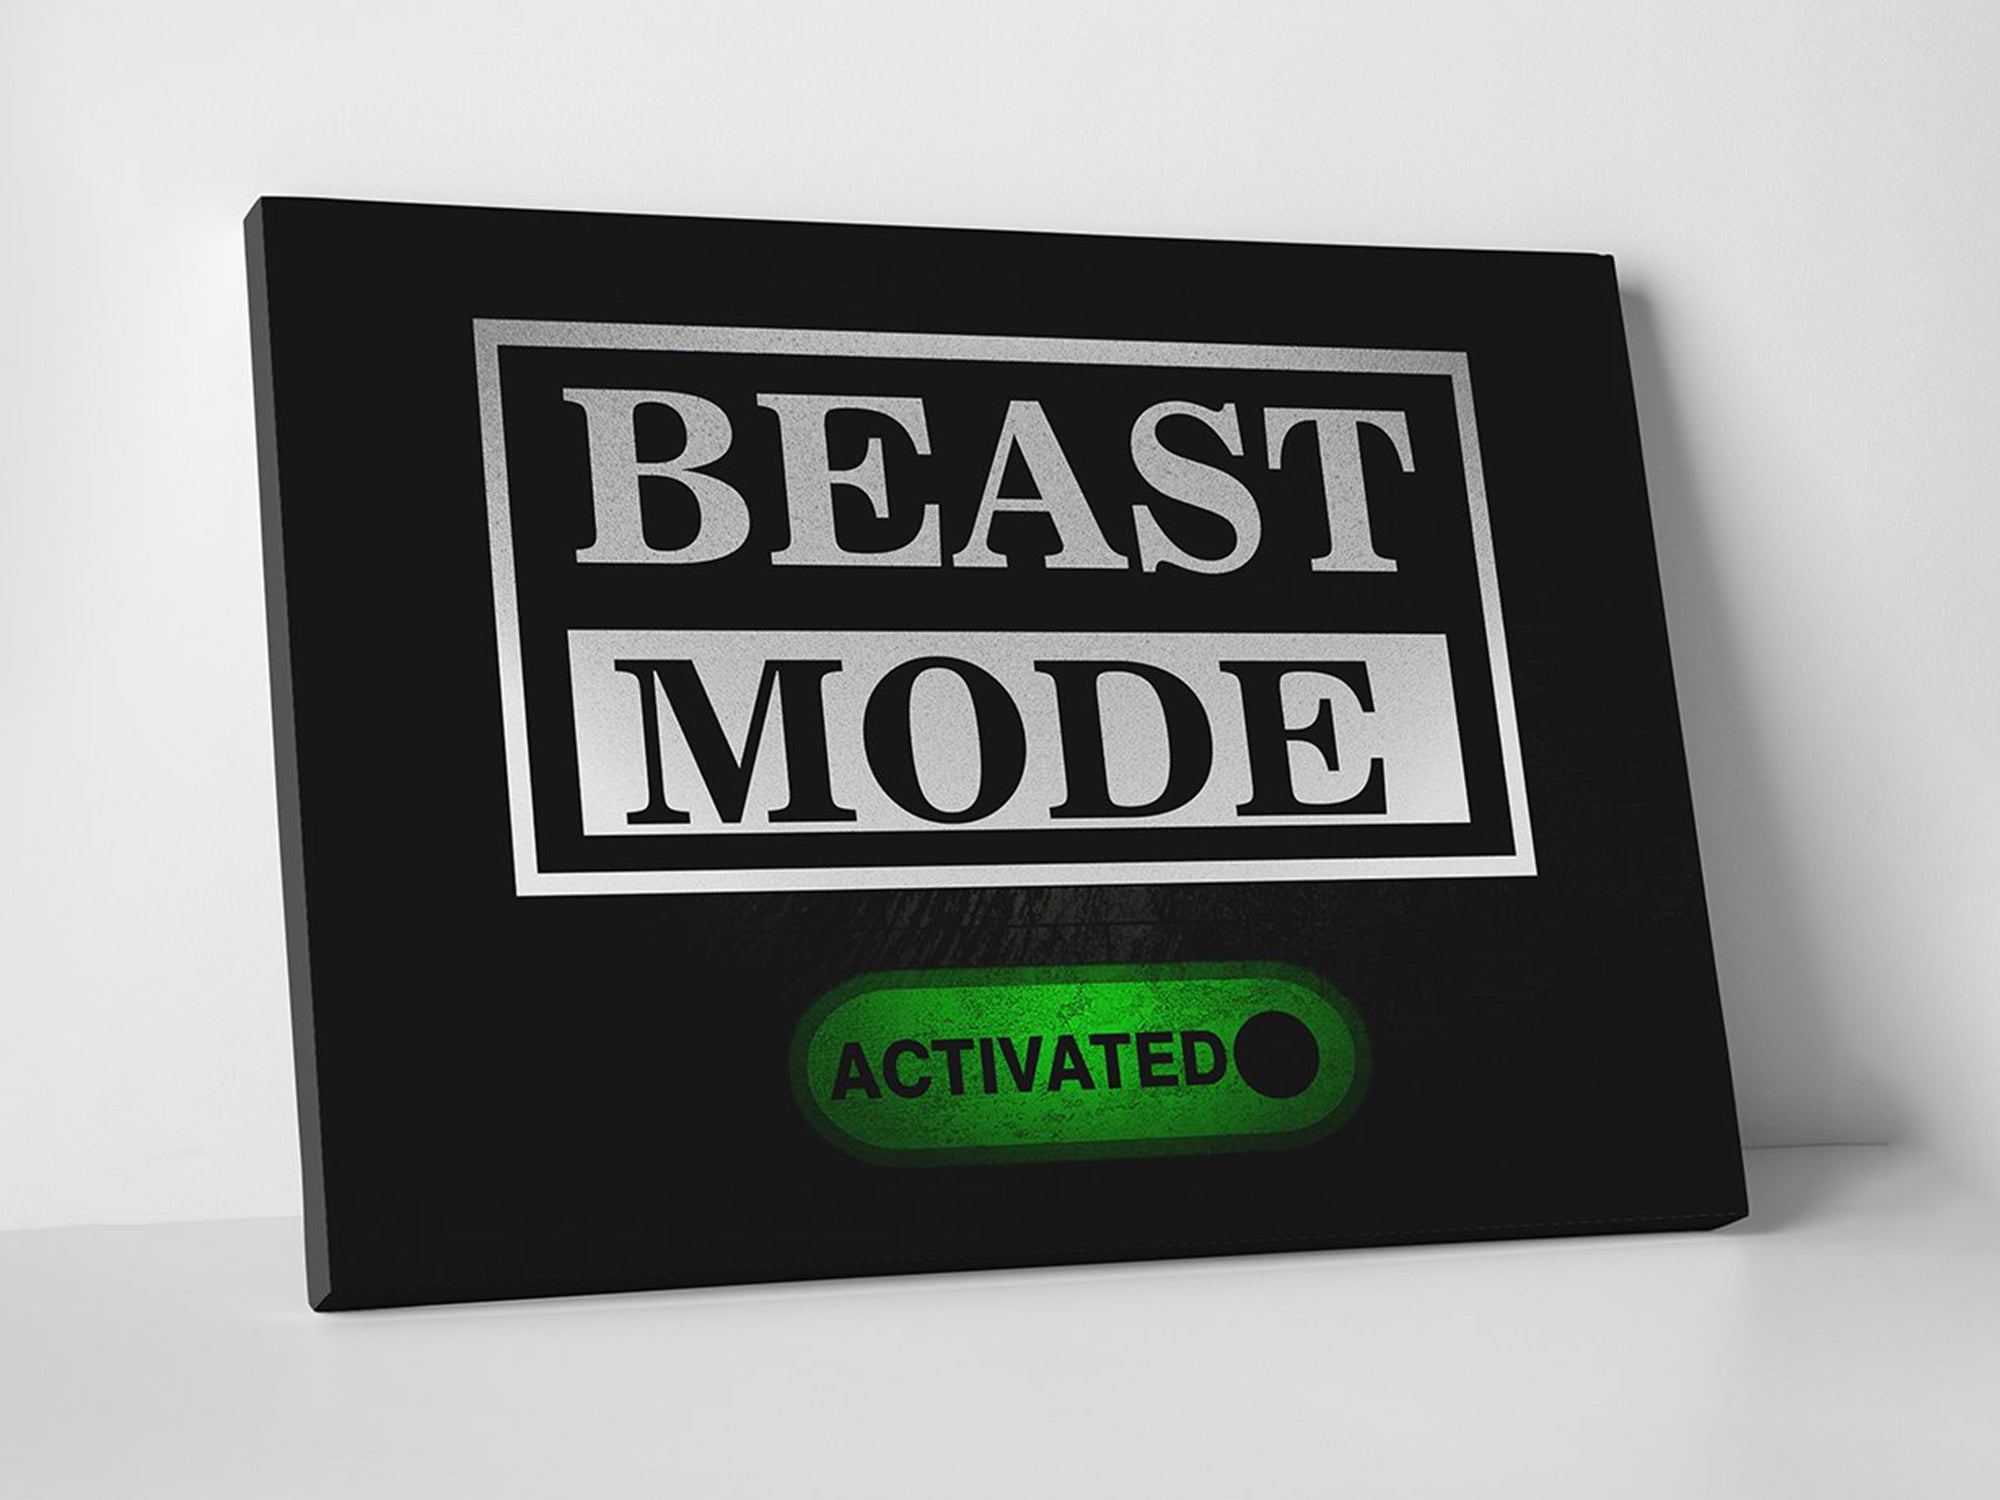 Beast Mode Activated Canvas Wall Art